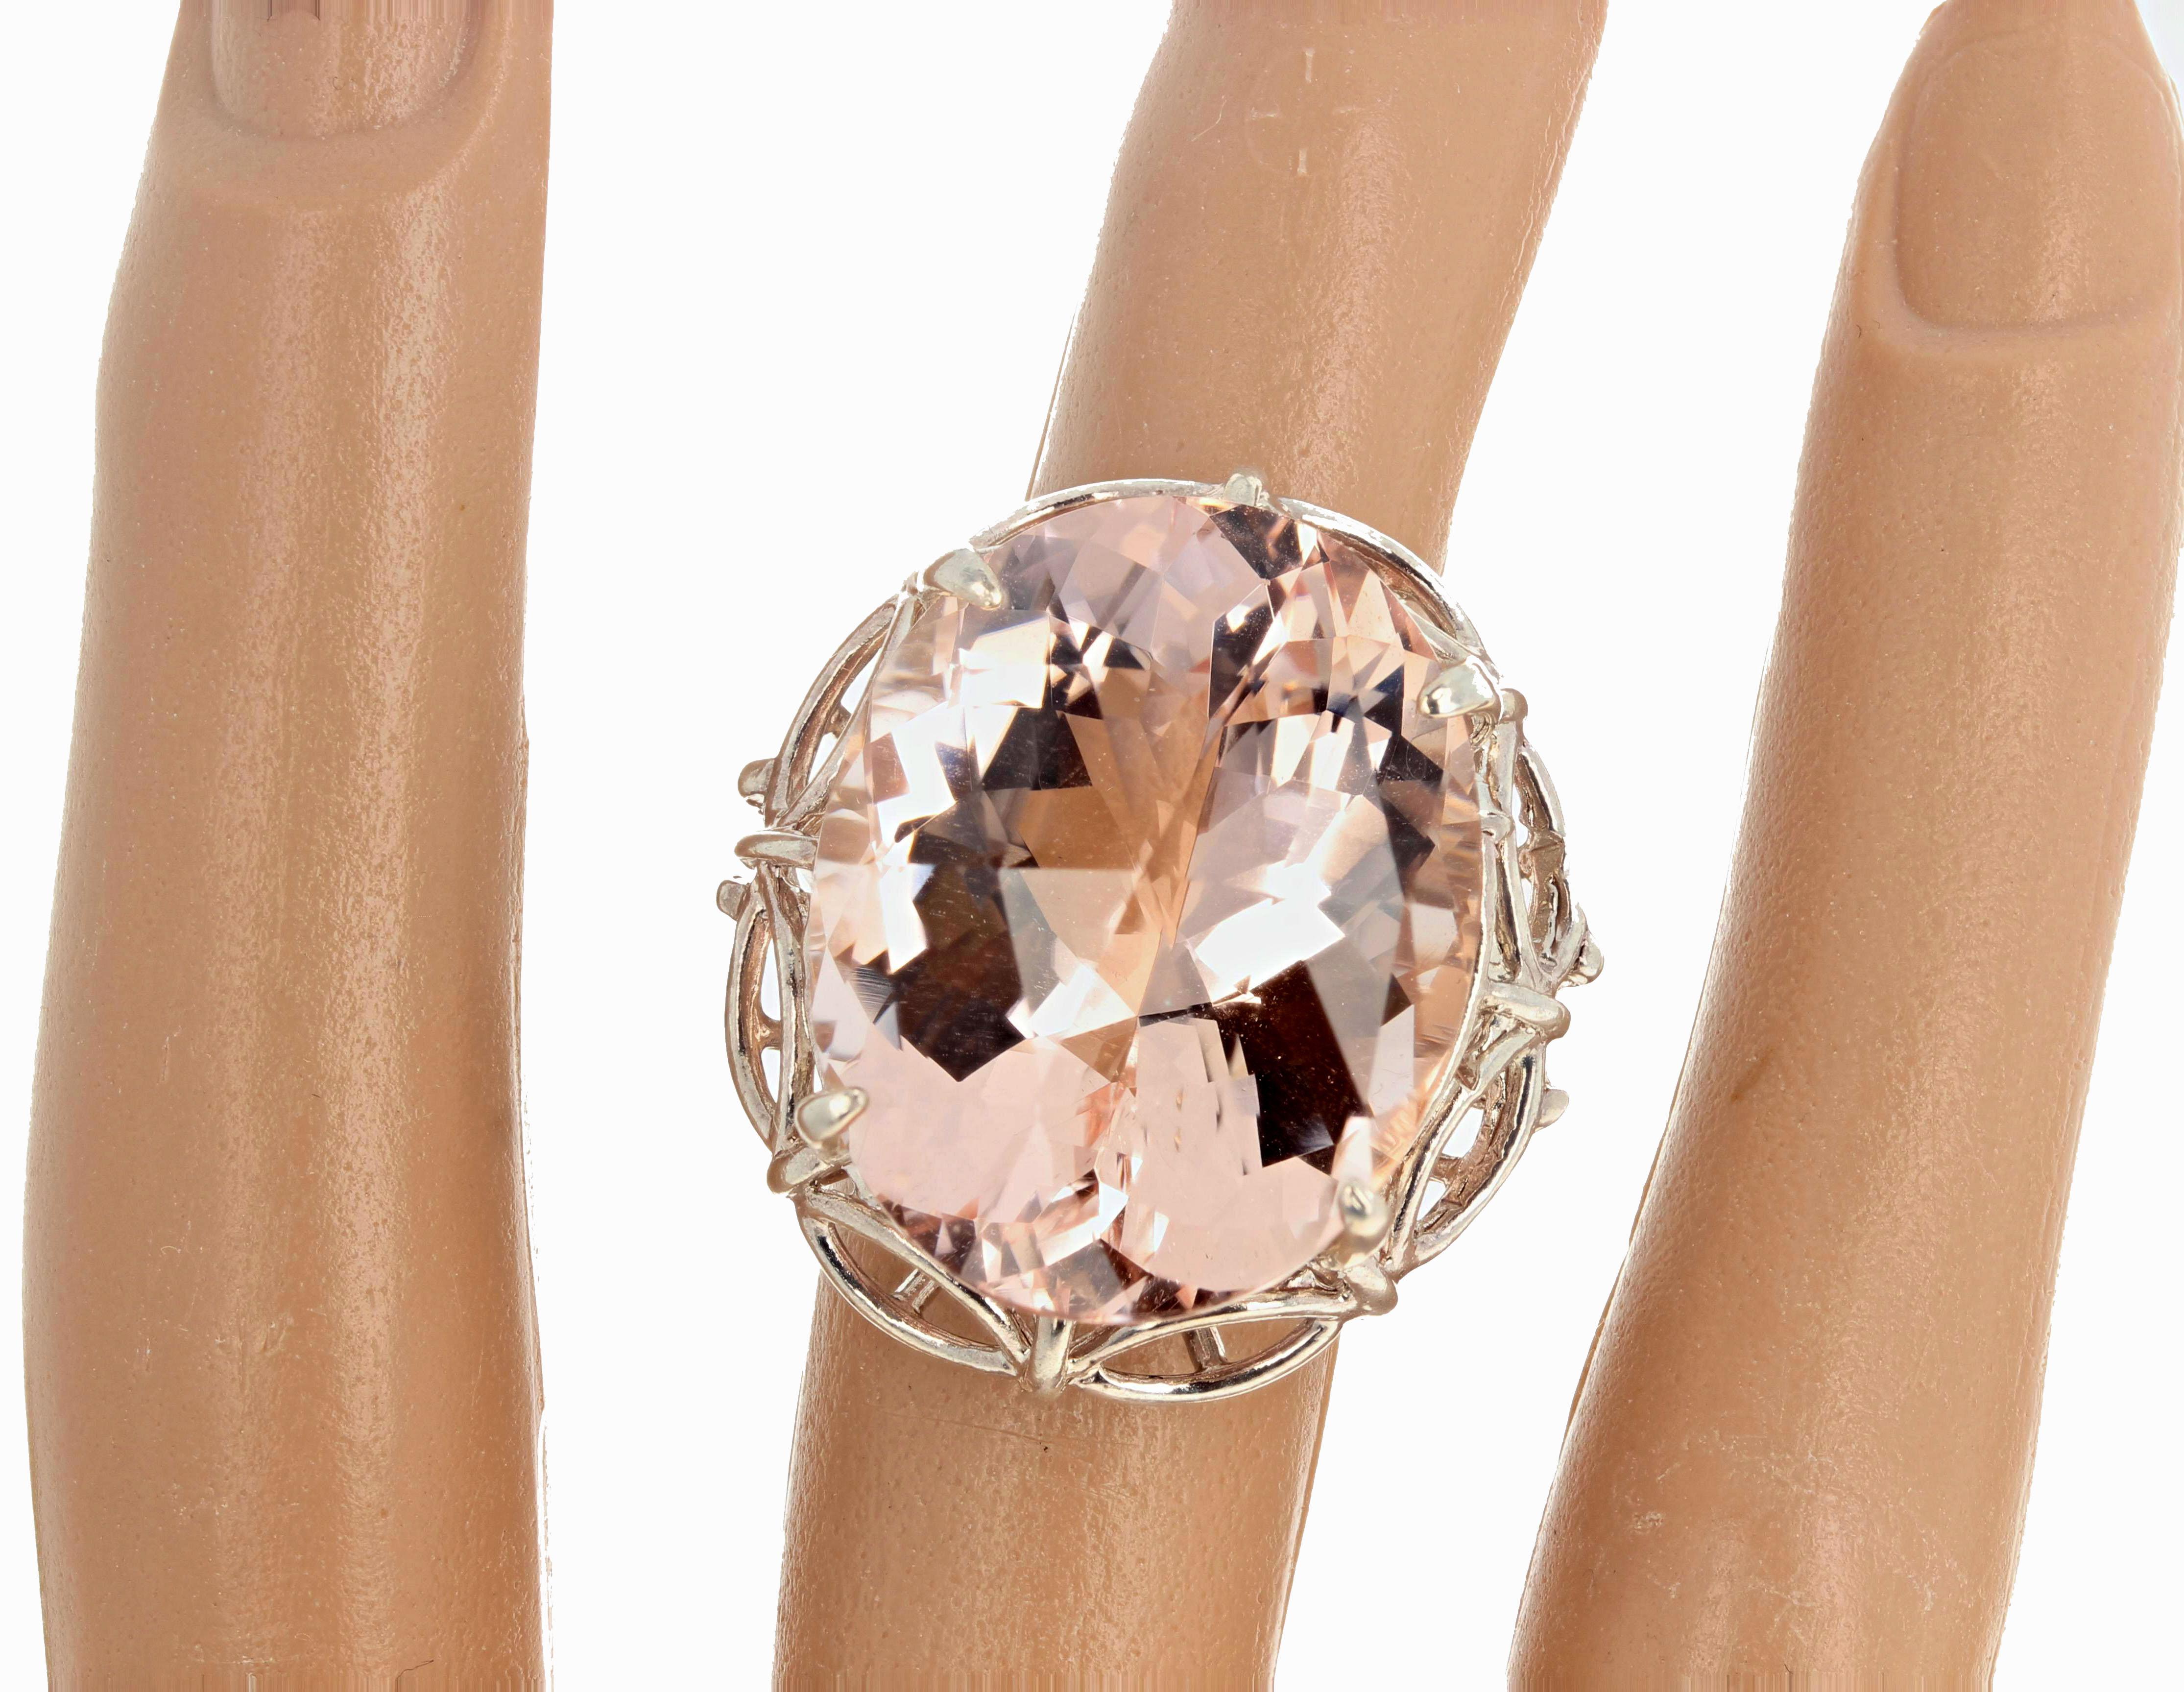 Unique Brilliant glittering clear beautiful huge natural 30 carat Morganite (24 mm x 19 mm) set in a sterling silver handmade ring size 6 (sizable).  There are no eye visible inclusions in this translucent pinky gemstone.  This goes perfectly with